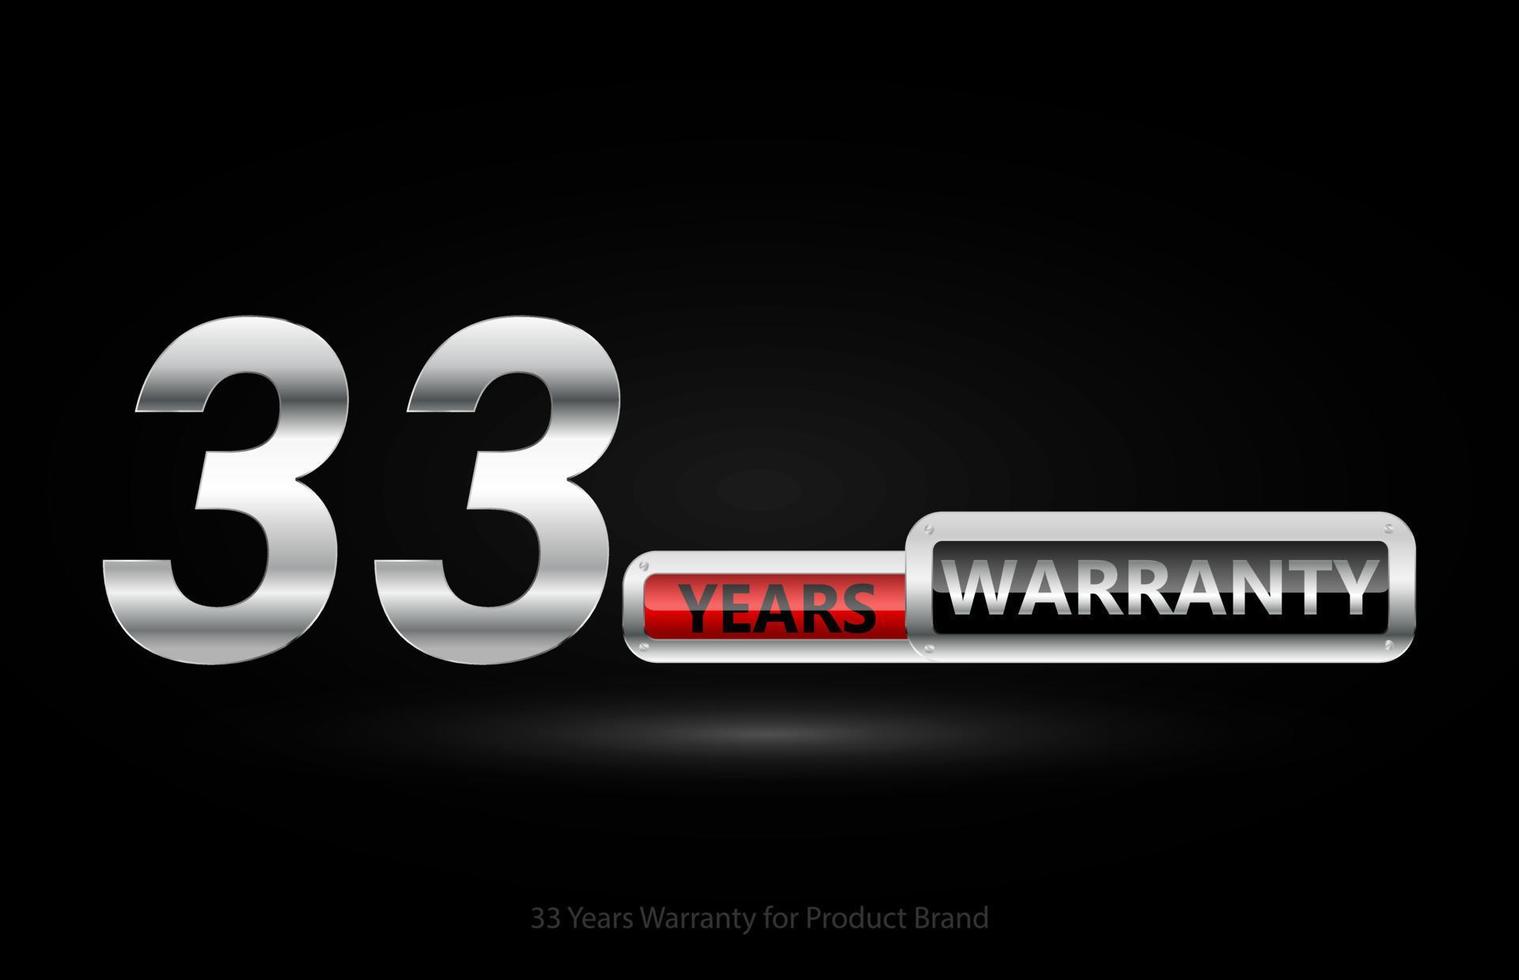 33 years warranty silver logo isolated on black background, vector design for product warranty, guarantee, service, corporate, and your business.